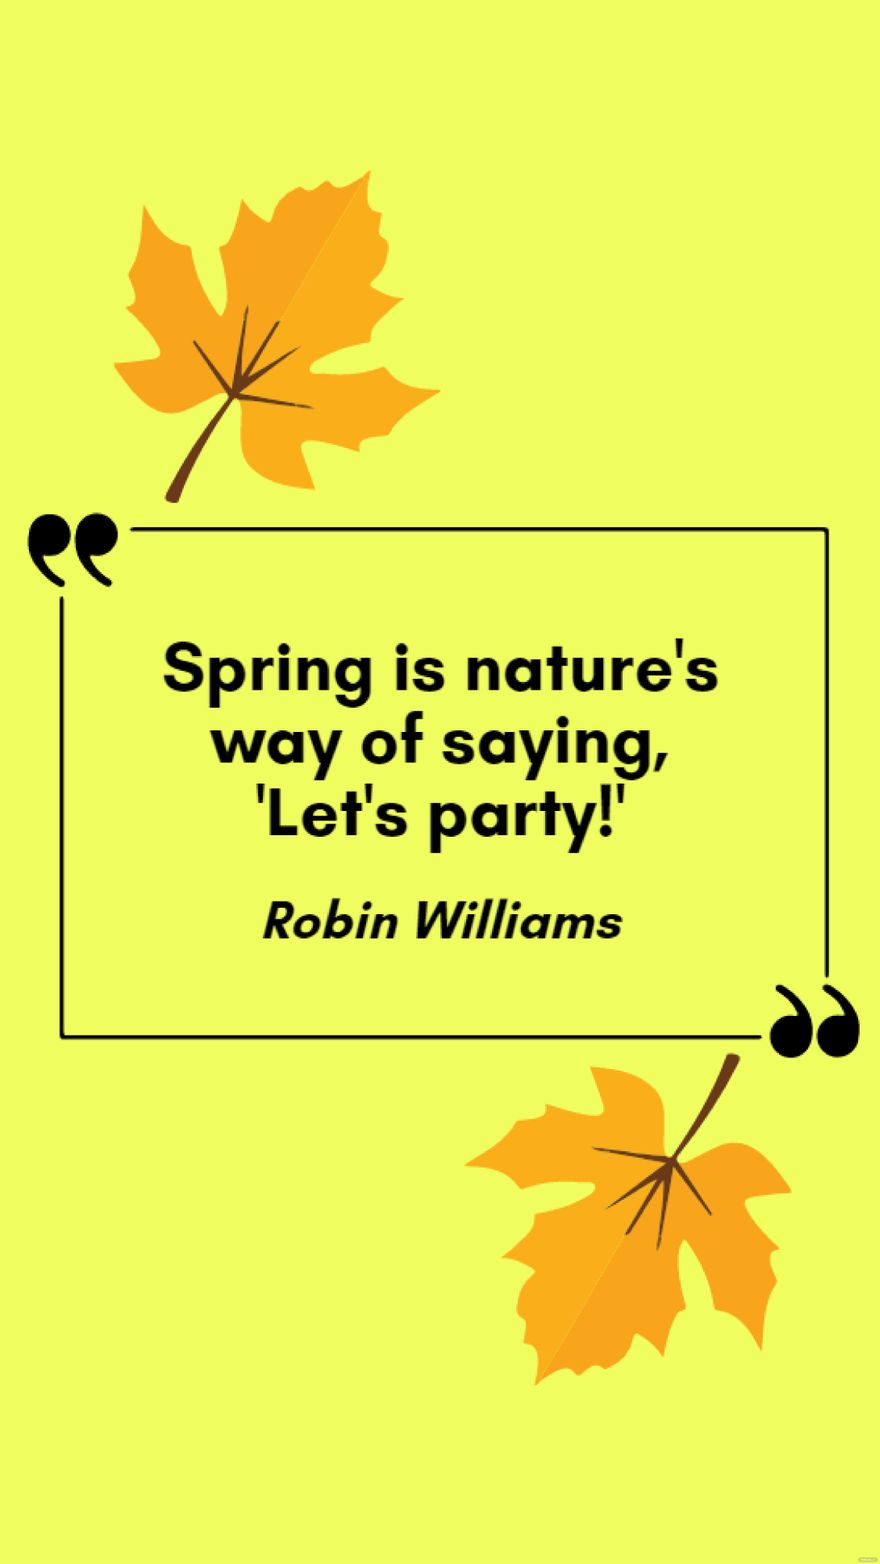 Robin Williams - Spring is nature's way of saying, 'Let's party!' in JPG